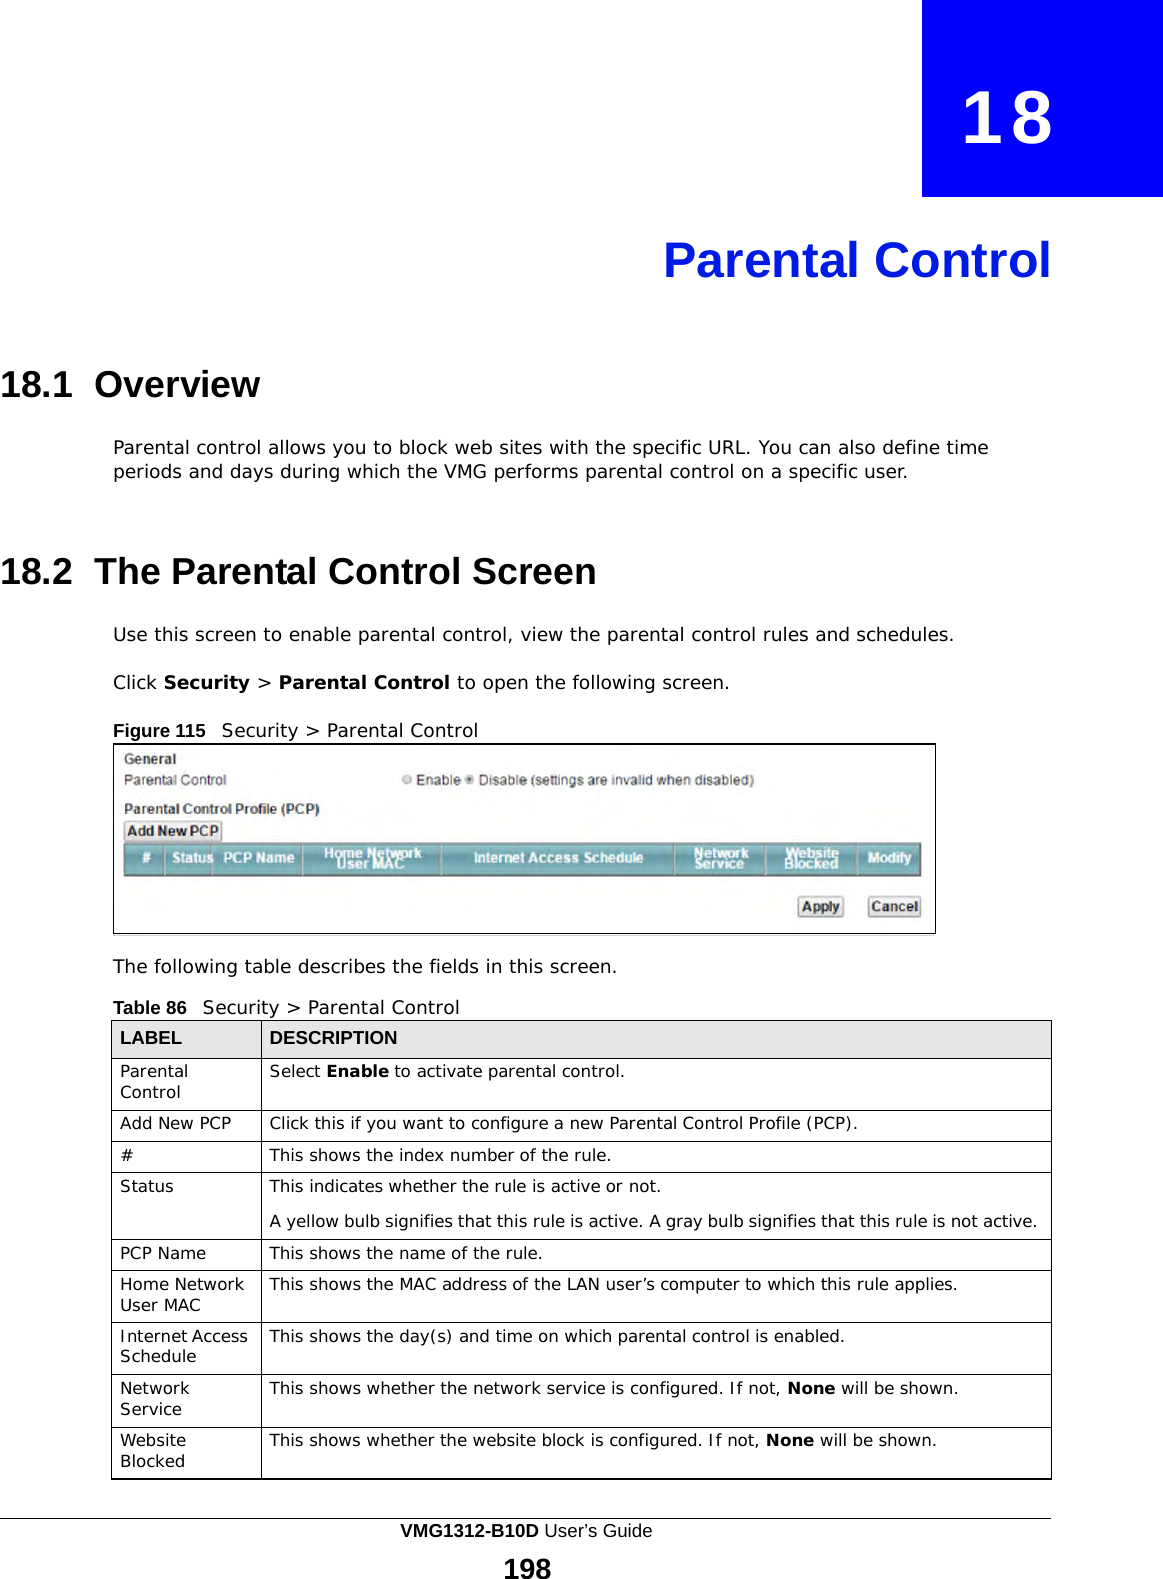    18     Parental Control     18.1 Overview  Parental control allows you to block web sites with the specific URL. You can also define time periods and days during which the VMG performs parental control on a specific user.    18.2 The Parental Control Screen  Use this screen to enable parental control, view the parental control rules and schedules. Click Security &gt; Parental Control to open the following screen. Figure 115   Security &gt; Parental Control           The following table describes the fields in this screen.  Table 86   Security &gt; Parental Control  LABEL DESCRIPTION Parental Control Select Enable to activate parental control. Add New PCP Click this if you want to configure a new Parental Control Profile (PCP). # This shows the index number of the rule. Status This indicates whether the rule is active or not.  A yellow bulb signifies that this rule is active. A gray bulb signifies that this rule is not active. PCP Name This shows the name of the rule. Home Network User MAC This shows the MAC address of the LAN user’s computer to which this rule applies. Internet Access Schedule This shows the day(s) and time on which parental control is enabled. Network Service This shows whether the network service is configured. If not, None will be shown. Website Blocked This shows whether the website block is configured. If not, None will be shown. VMG1312-B10D User’s Guide 198  